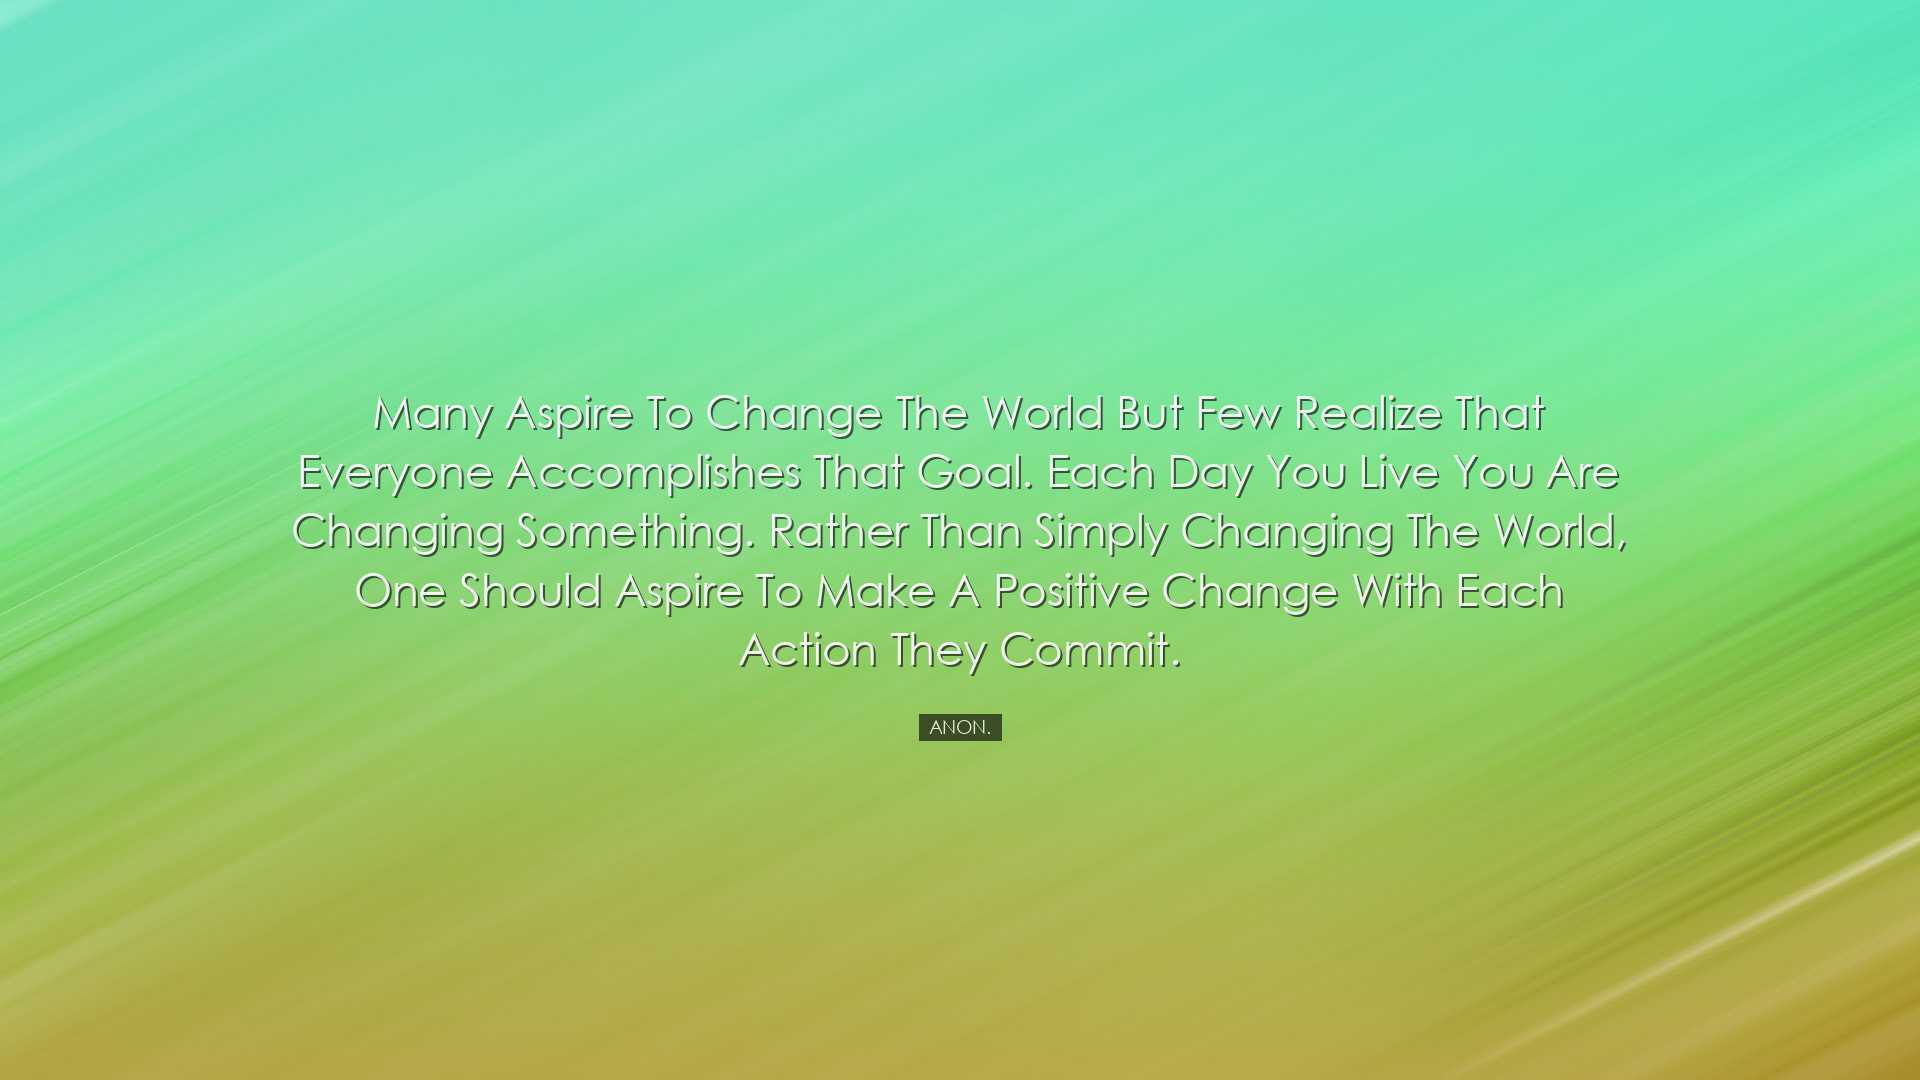 Many aspire to change the world but few realize that everyone acco